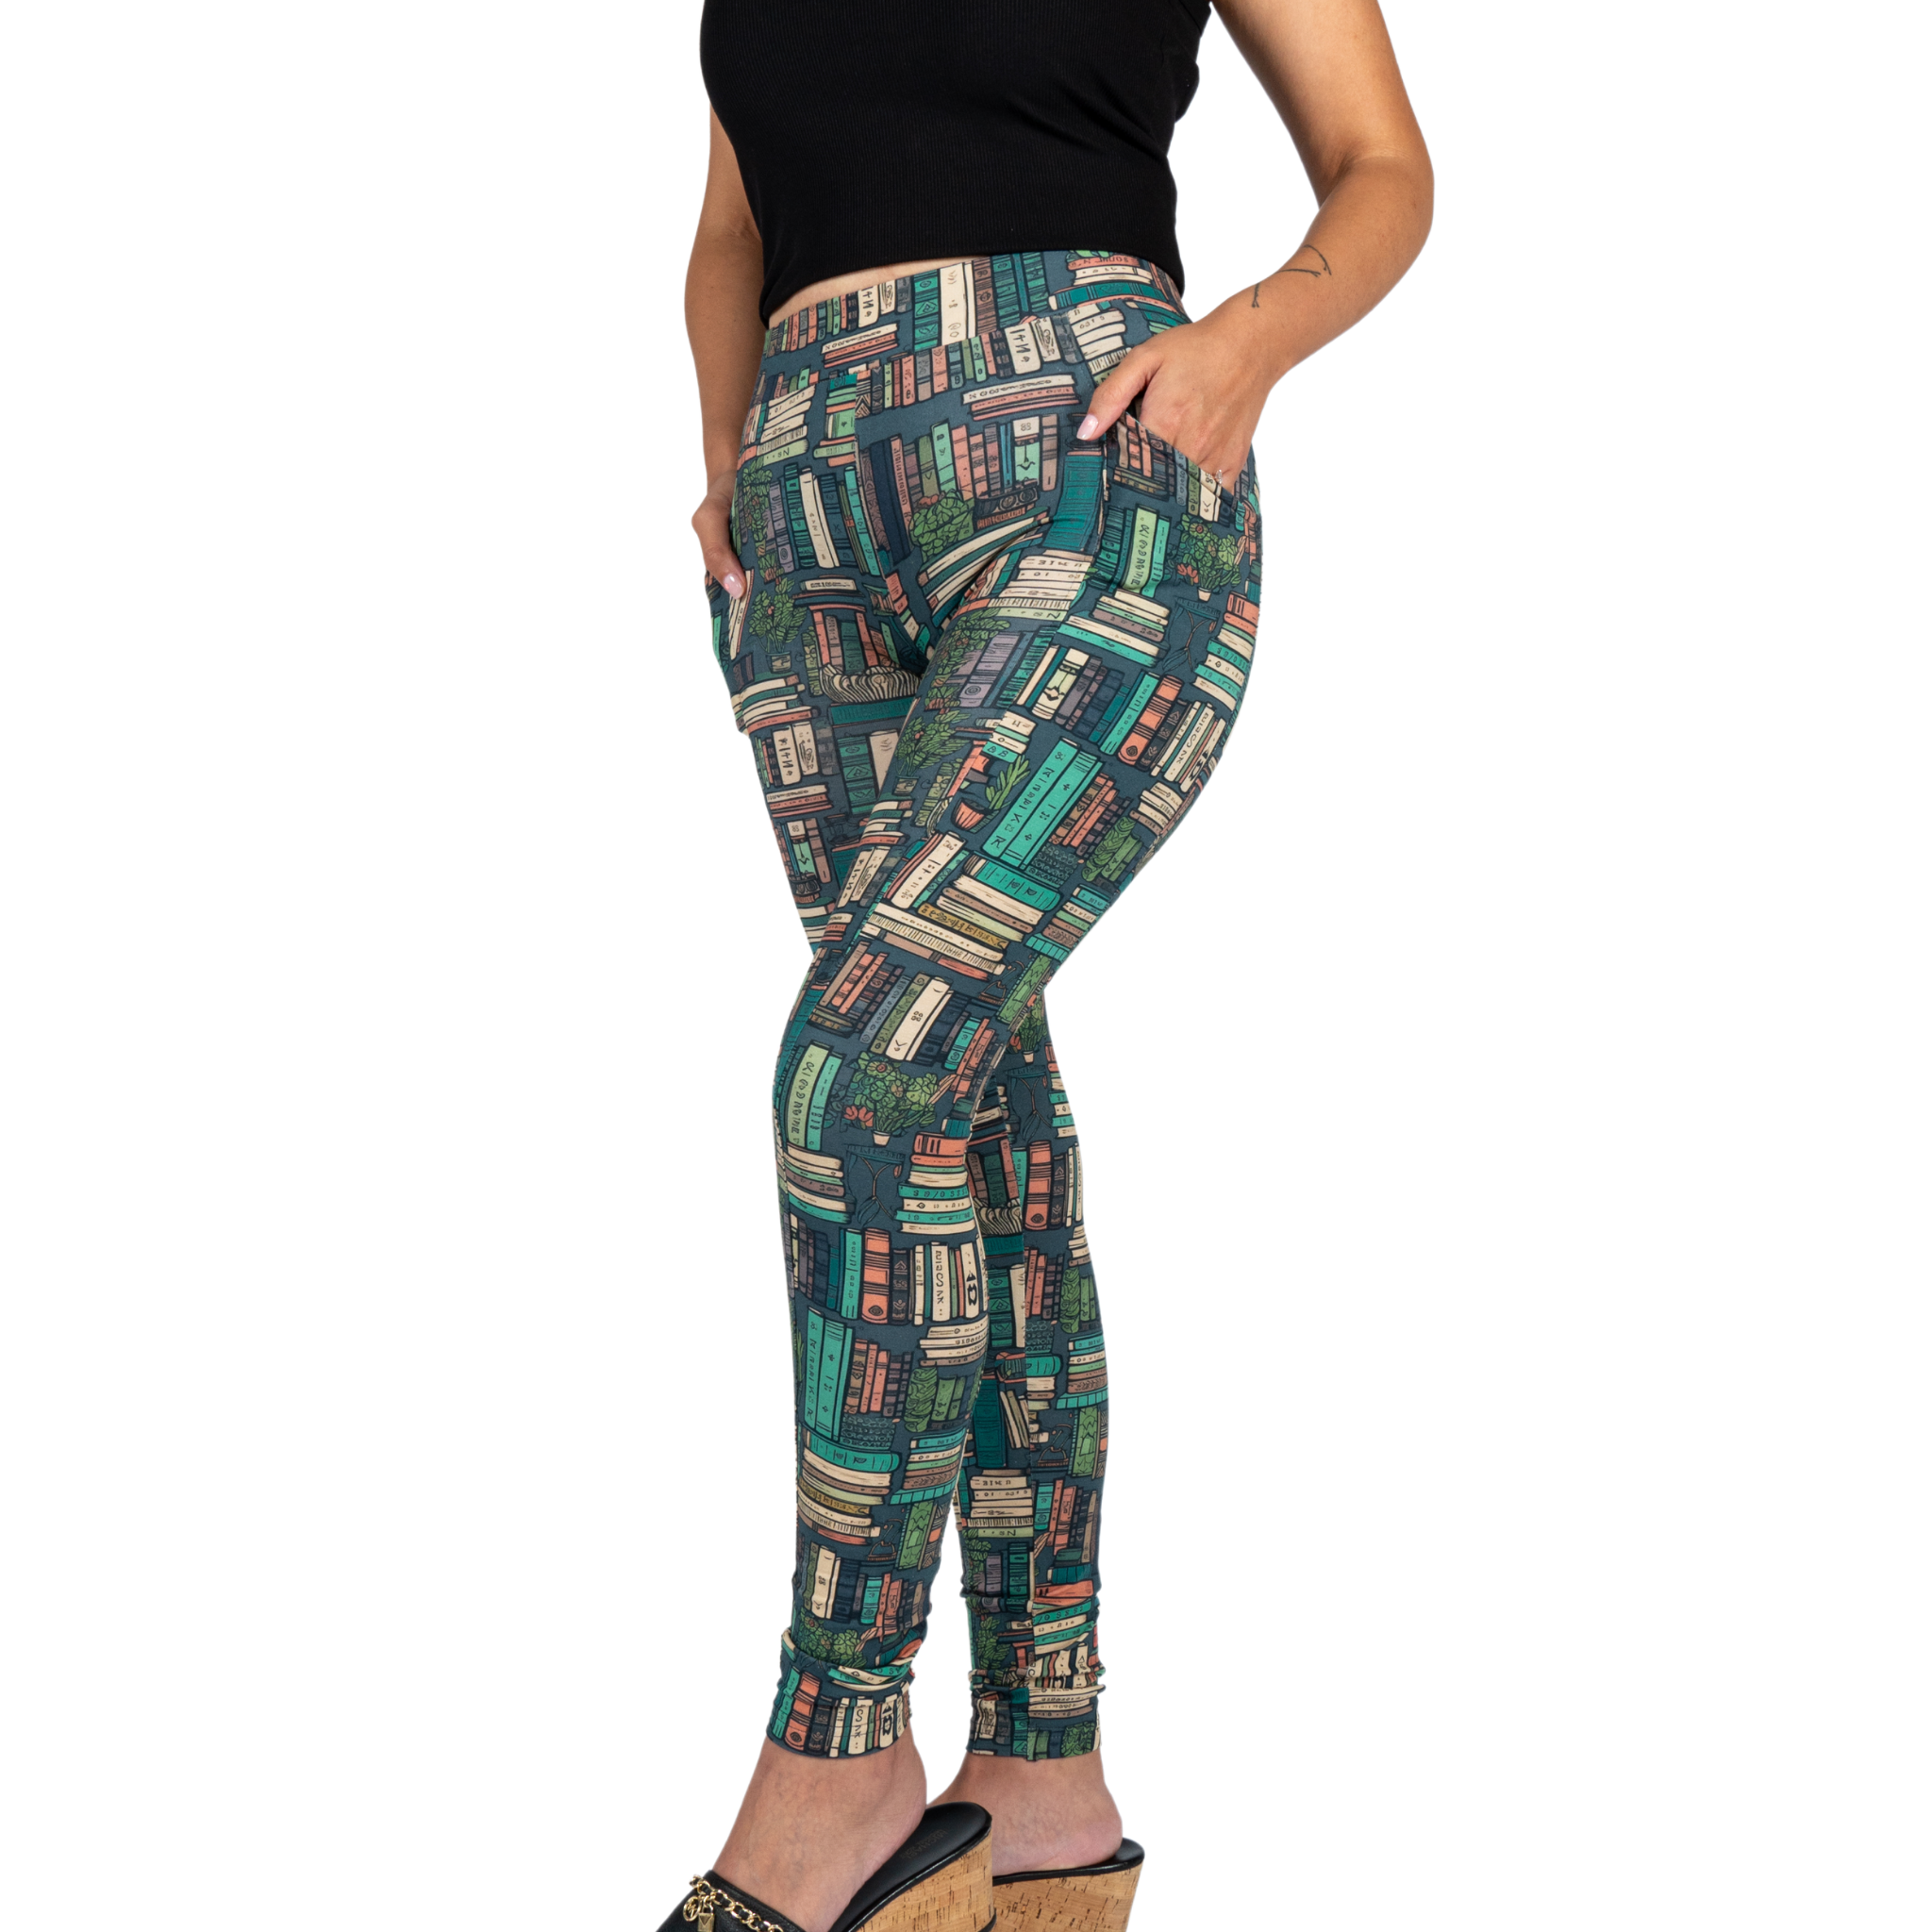 Botanical Library Adults Leggings with Pockets